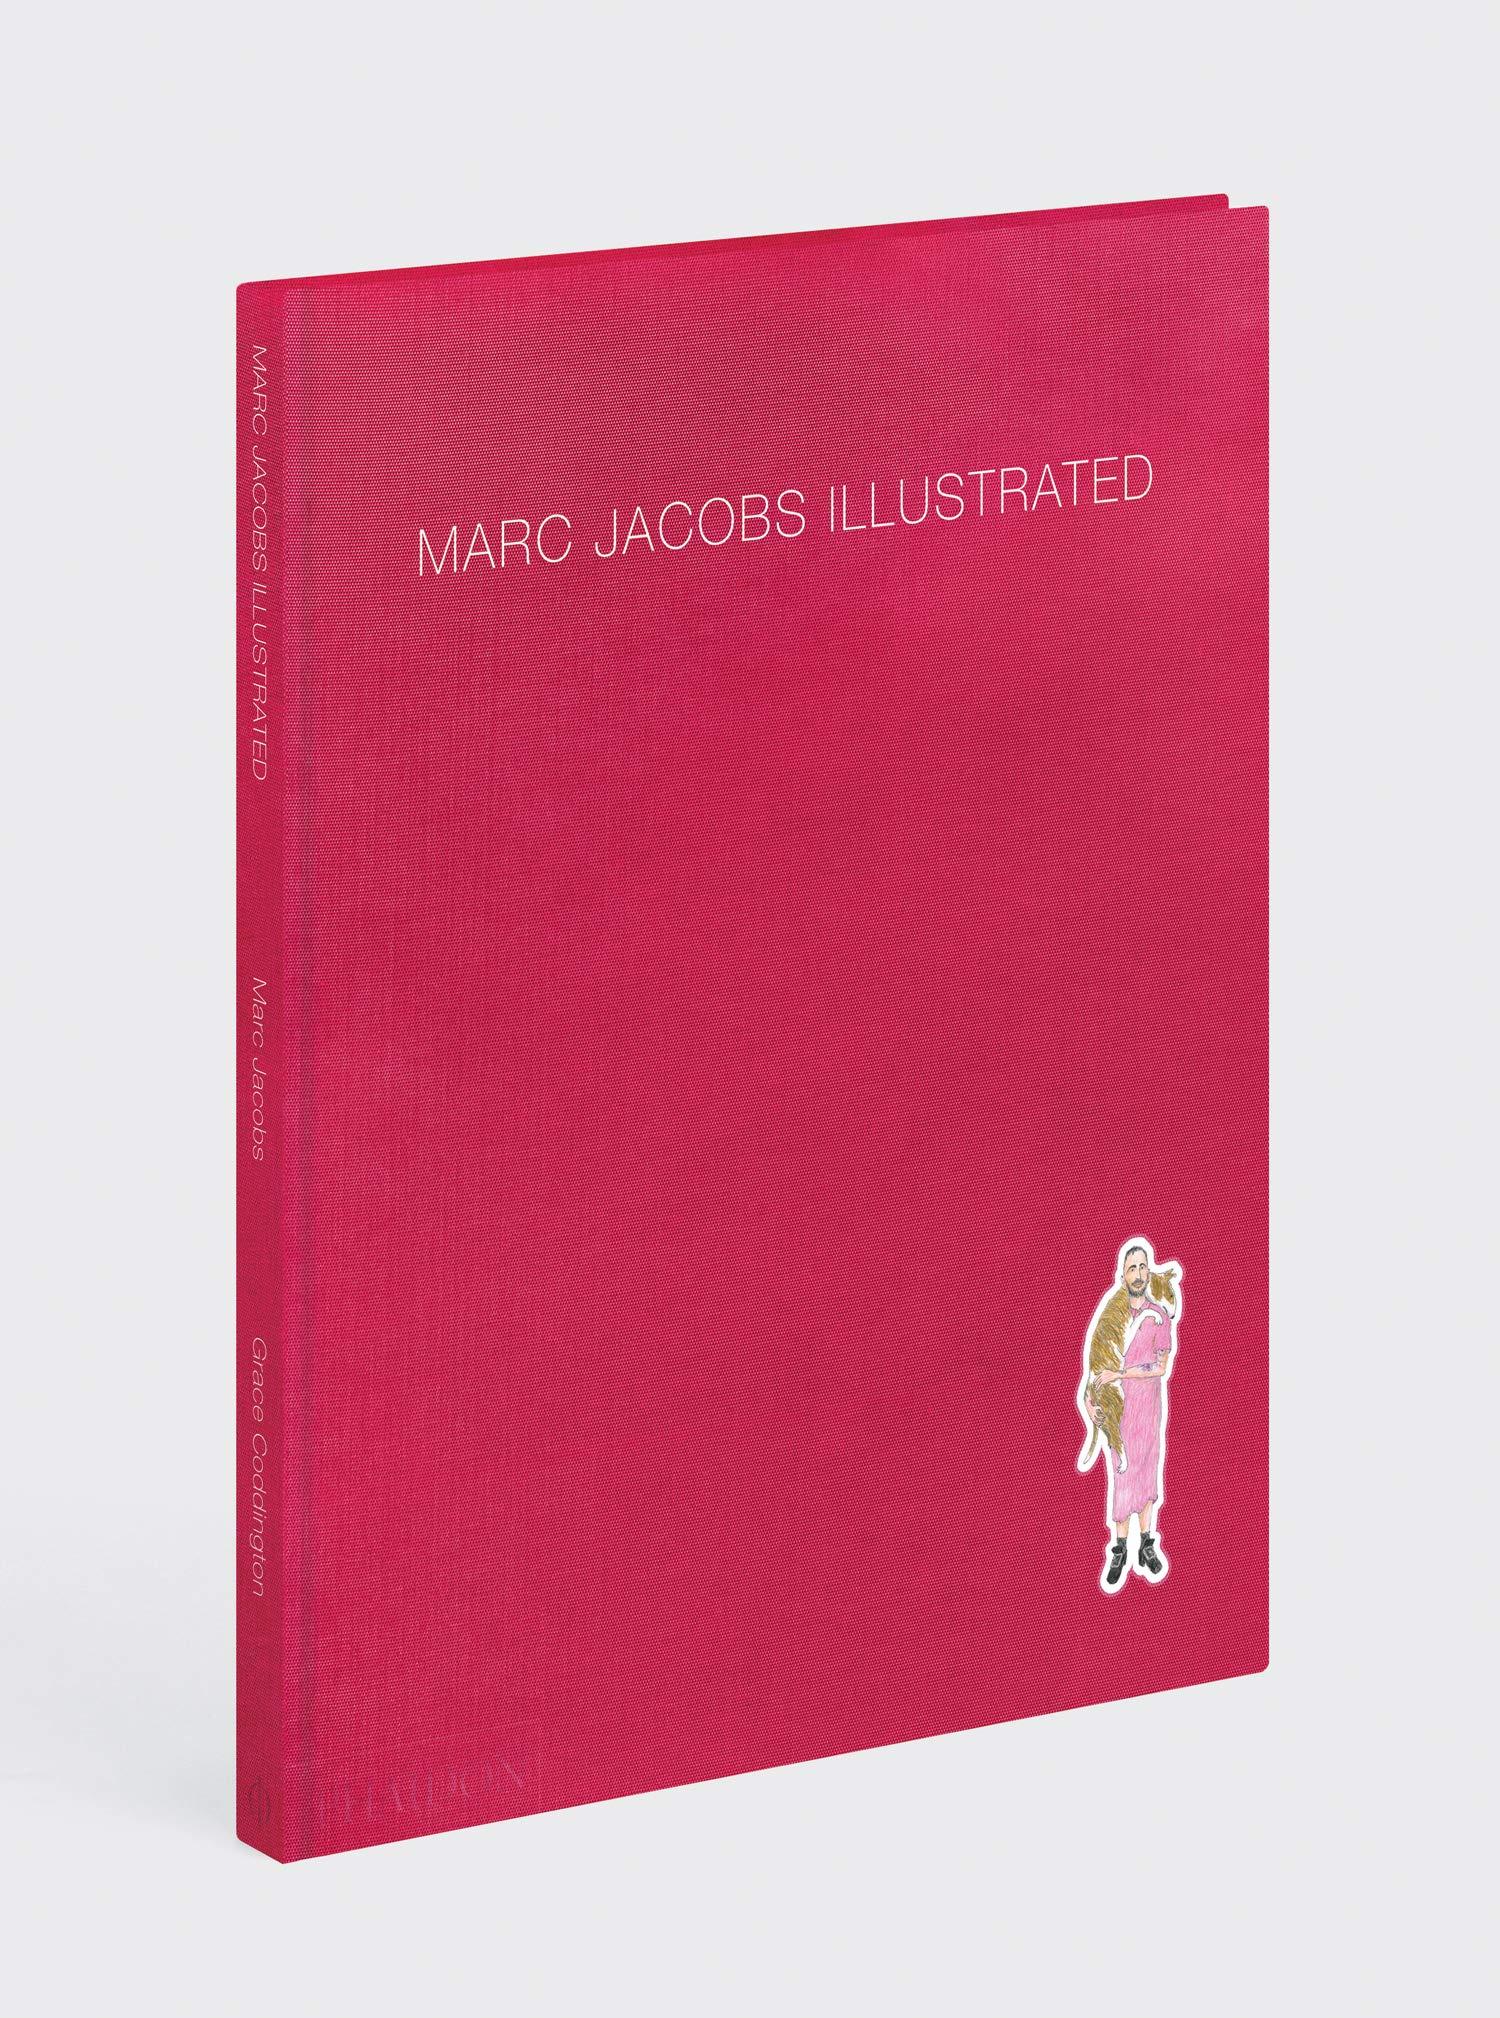 Marc Jacobs Illustrated (Hardcover) by Grace Coddington
In stock in Los Angeles

A unique monograph of over 50 collections created by the fashion designer Marc Jacobs in the past 25 years and illustrated by Grace Coddington

In 2016,